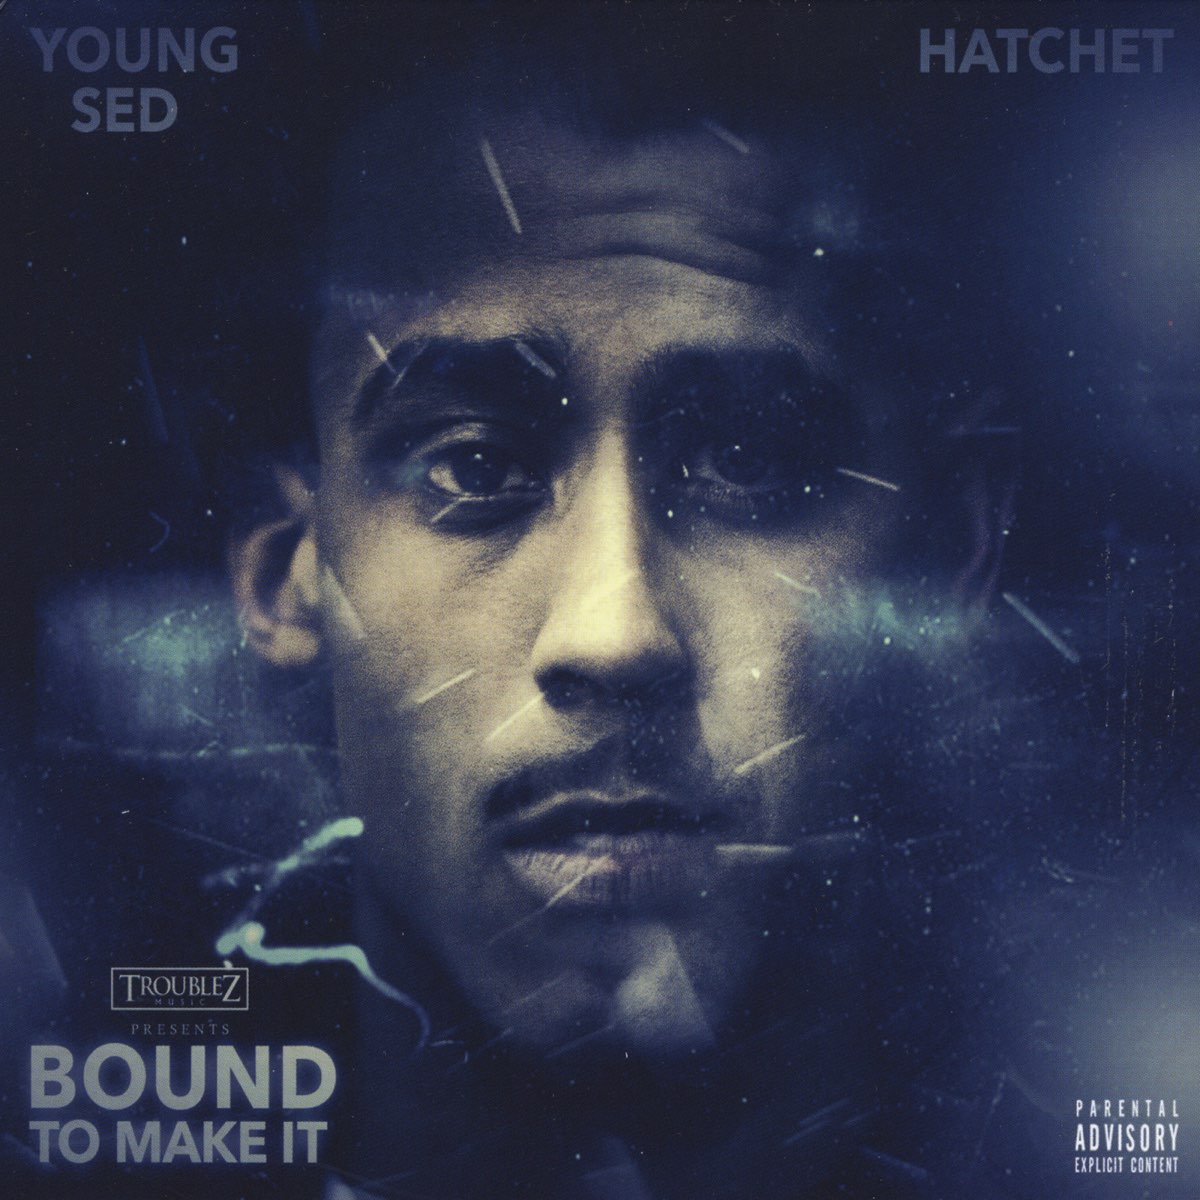 Hatchet & Young Sed - Bound To Make It